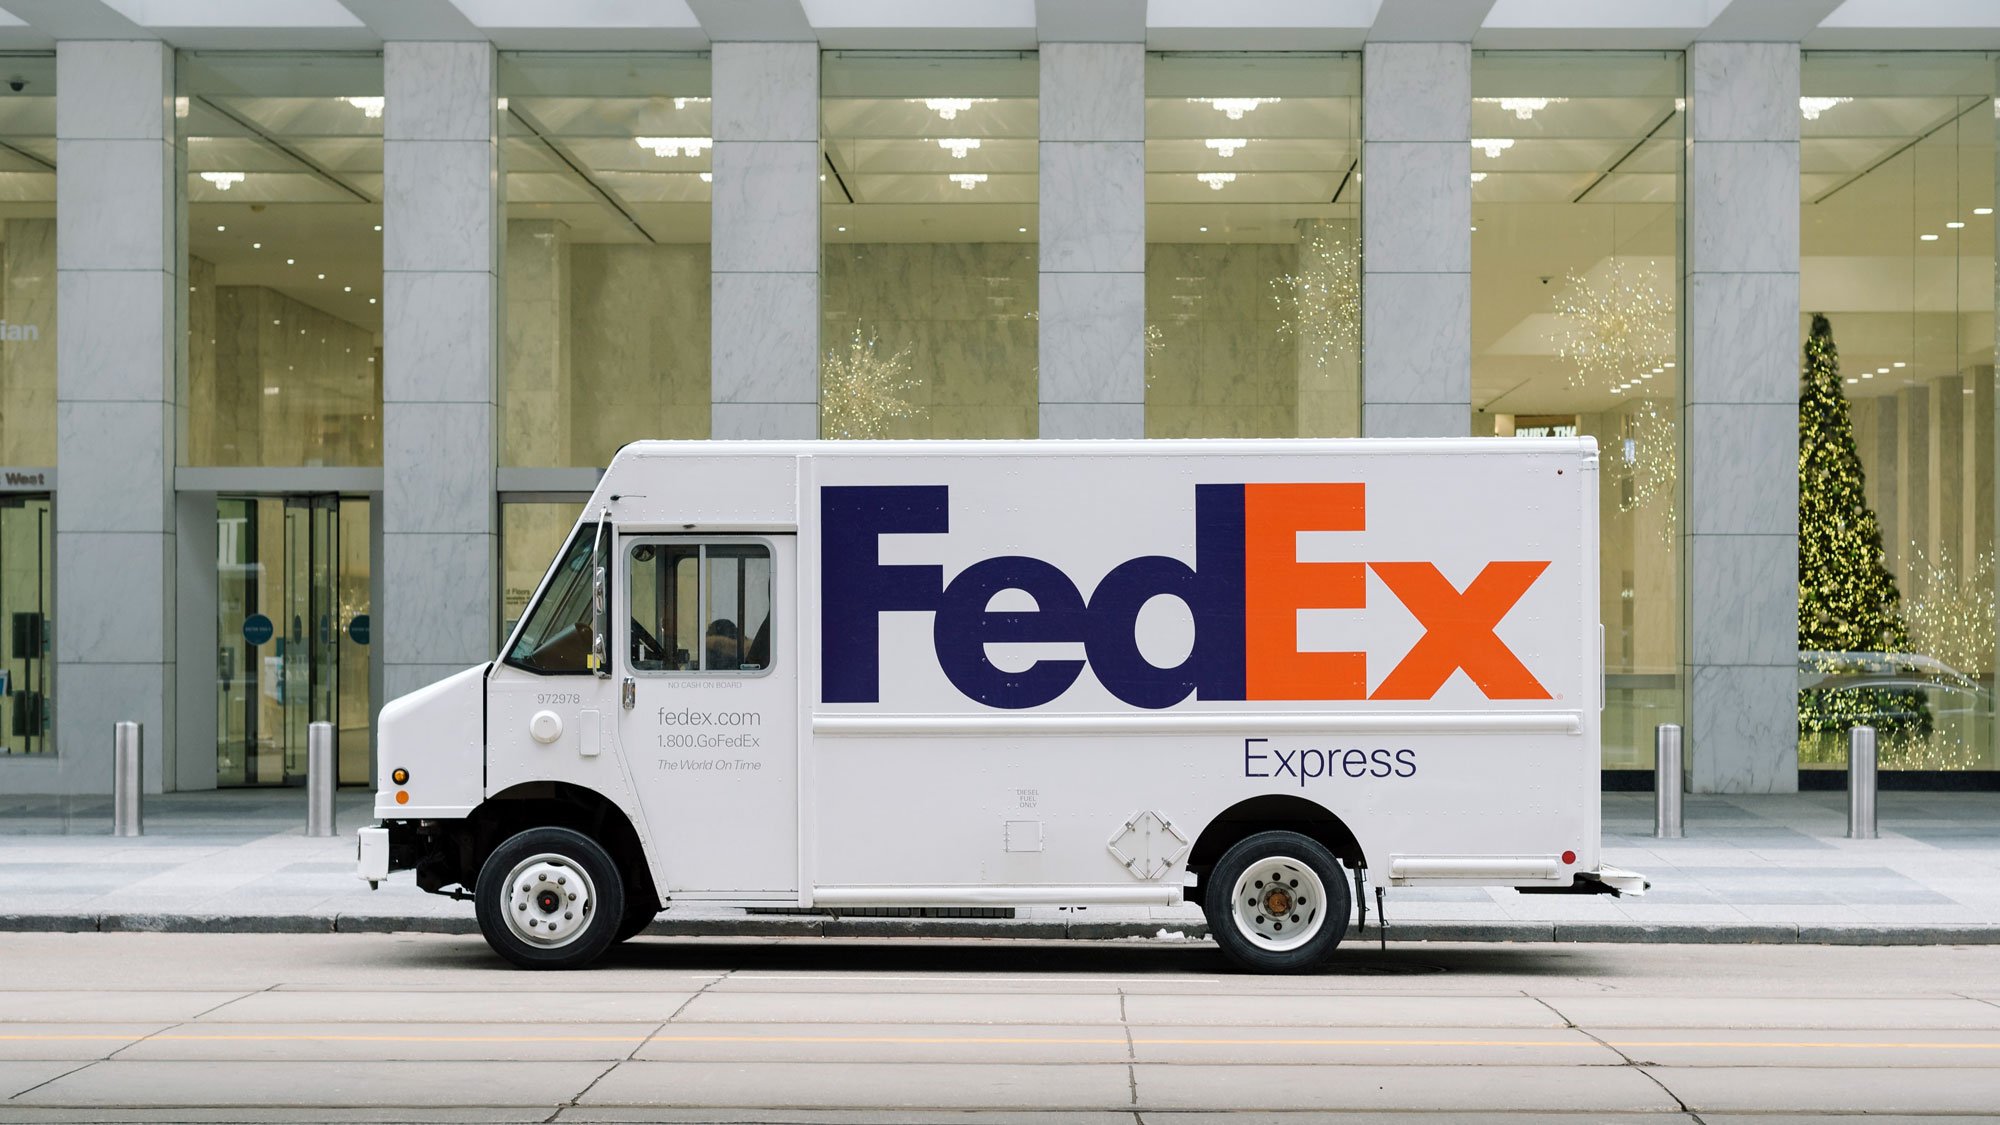 FedEx was a pioneer of tracking deliveries, an example of innovation beyond the core